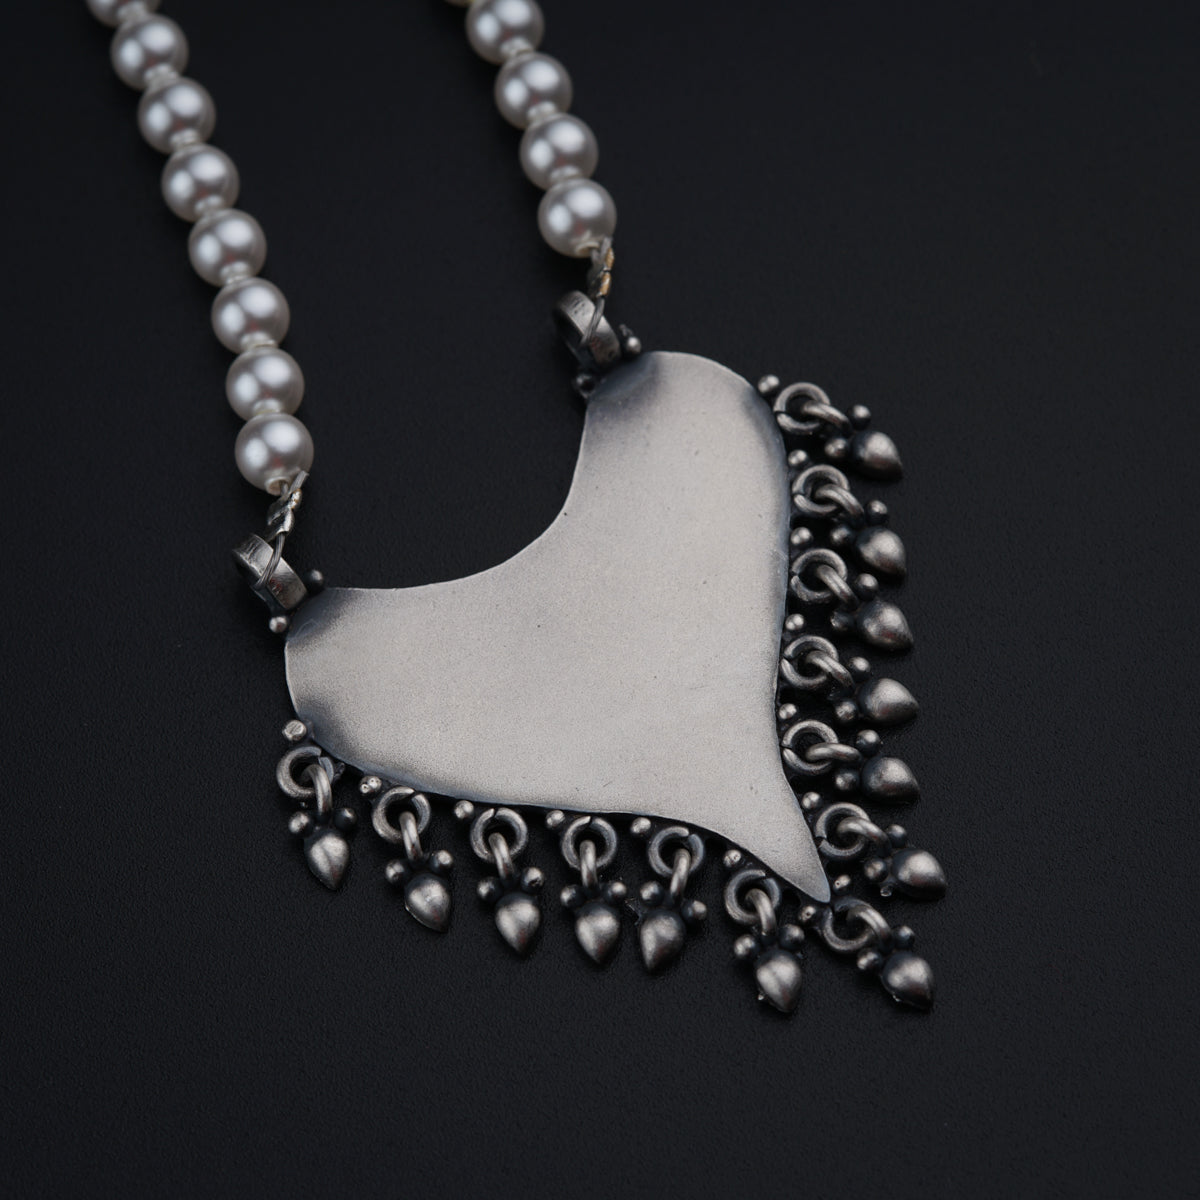 a necklace with a heart shaped pendant on a black background